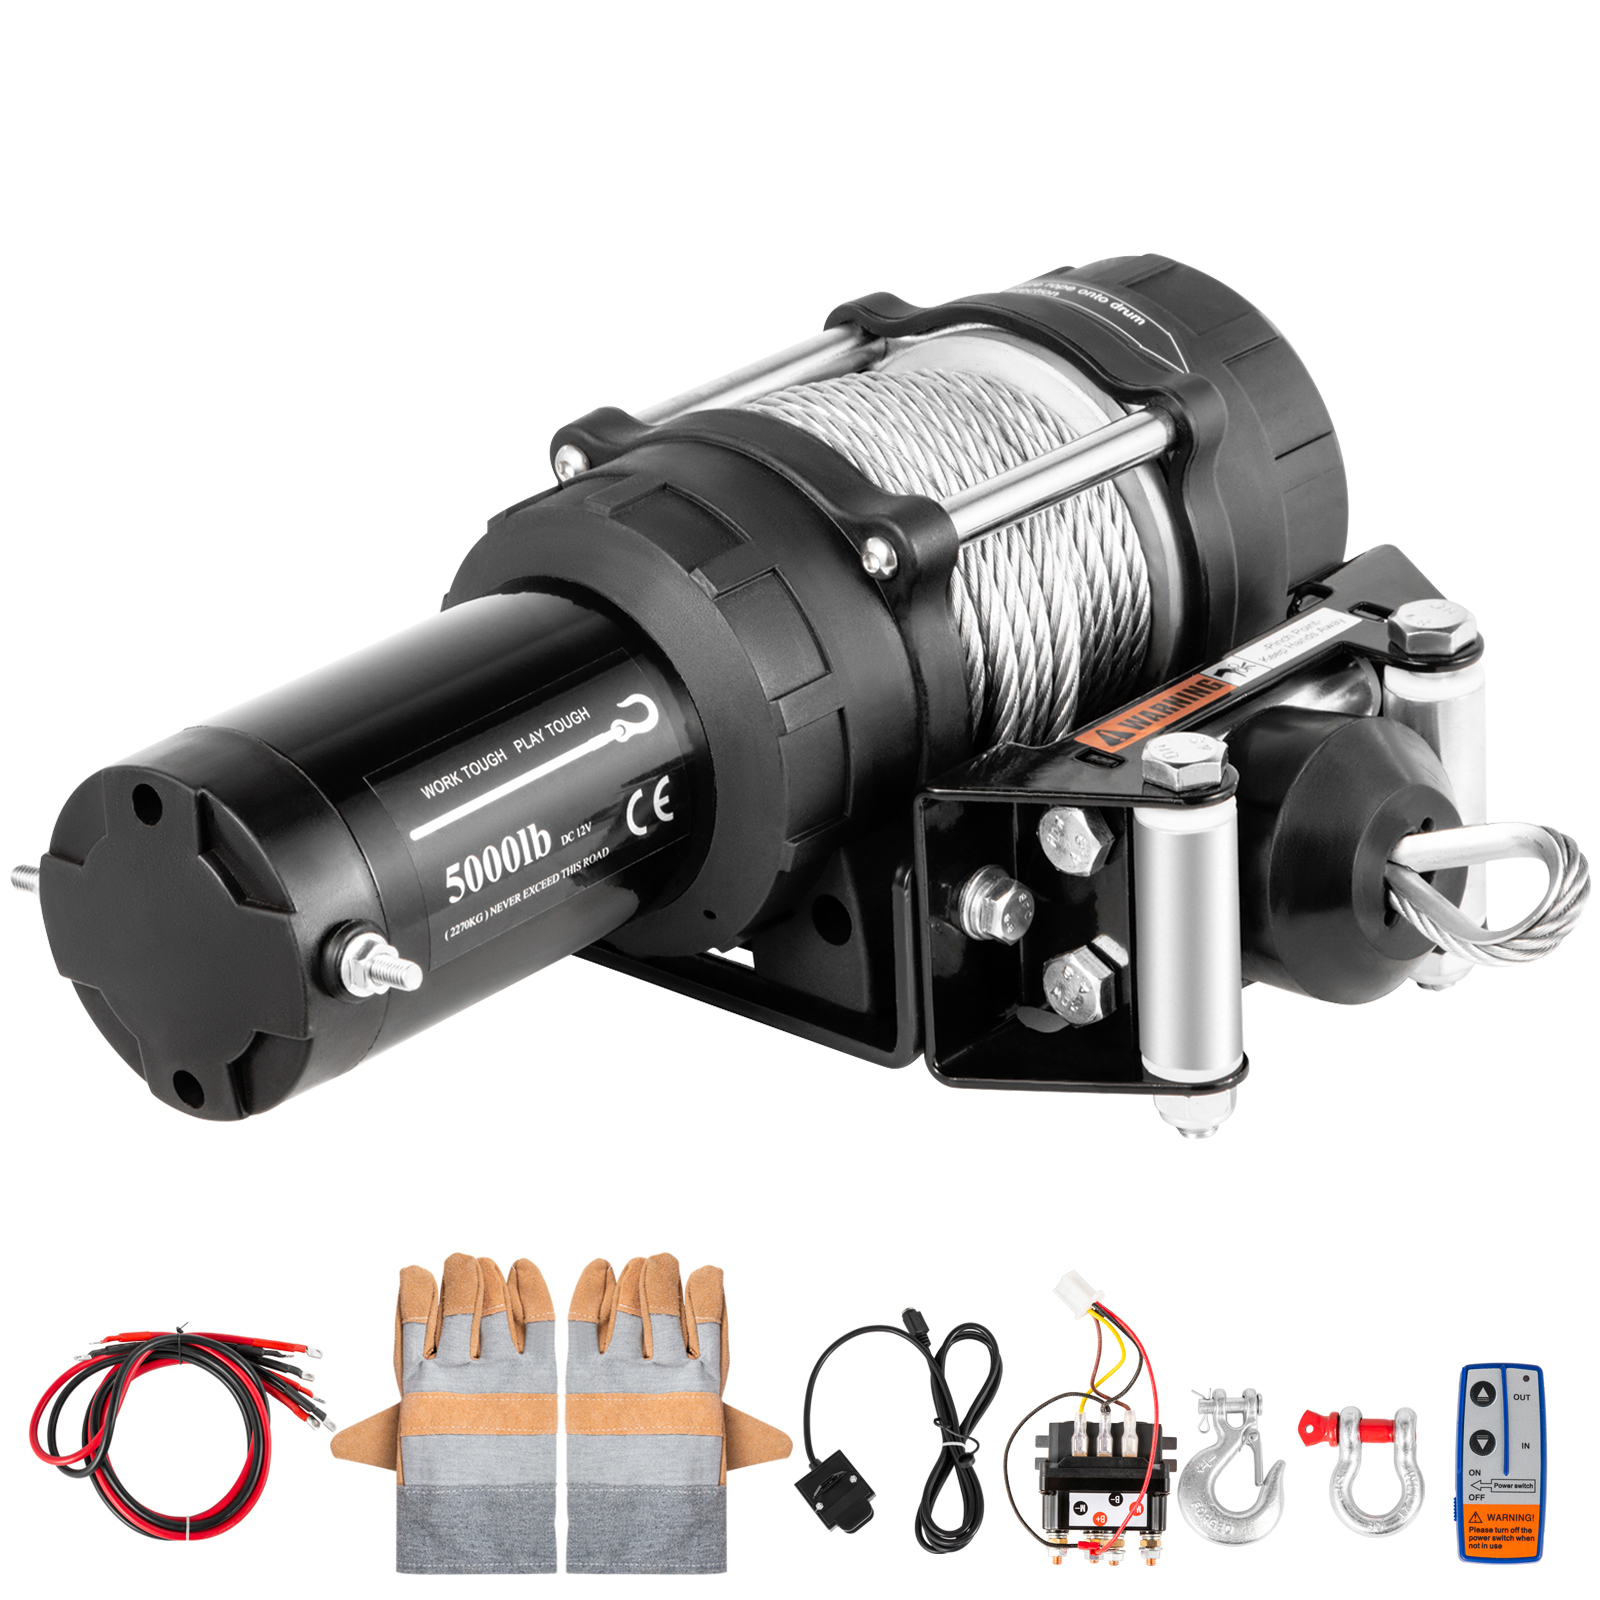 VEVOR Truck Winch 15500lbs Electric Winch 28.5m/93.5ft Cable Steel 12V Power Winch Jeep Winch with Wireless Remote Control and Powerful Motor for UTV ATV & Jeep Truck and Wrangler in Car Lift 